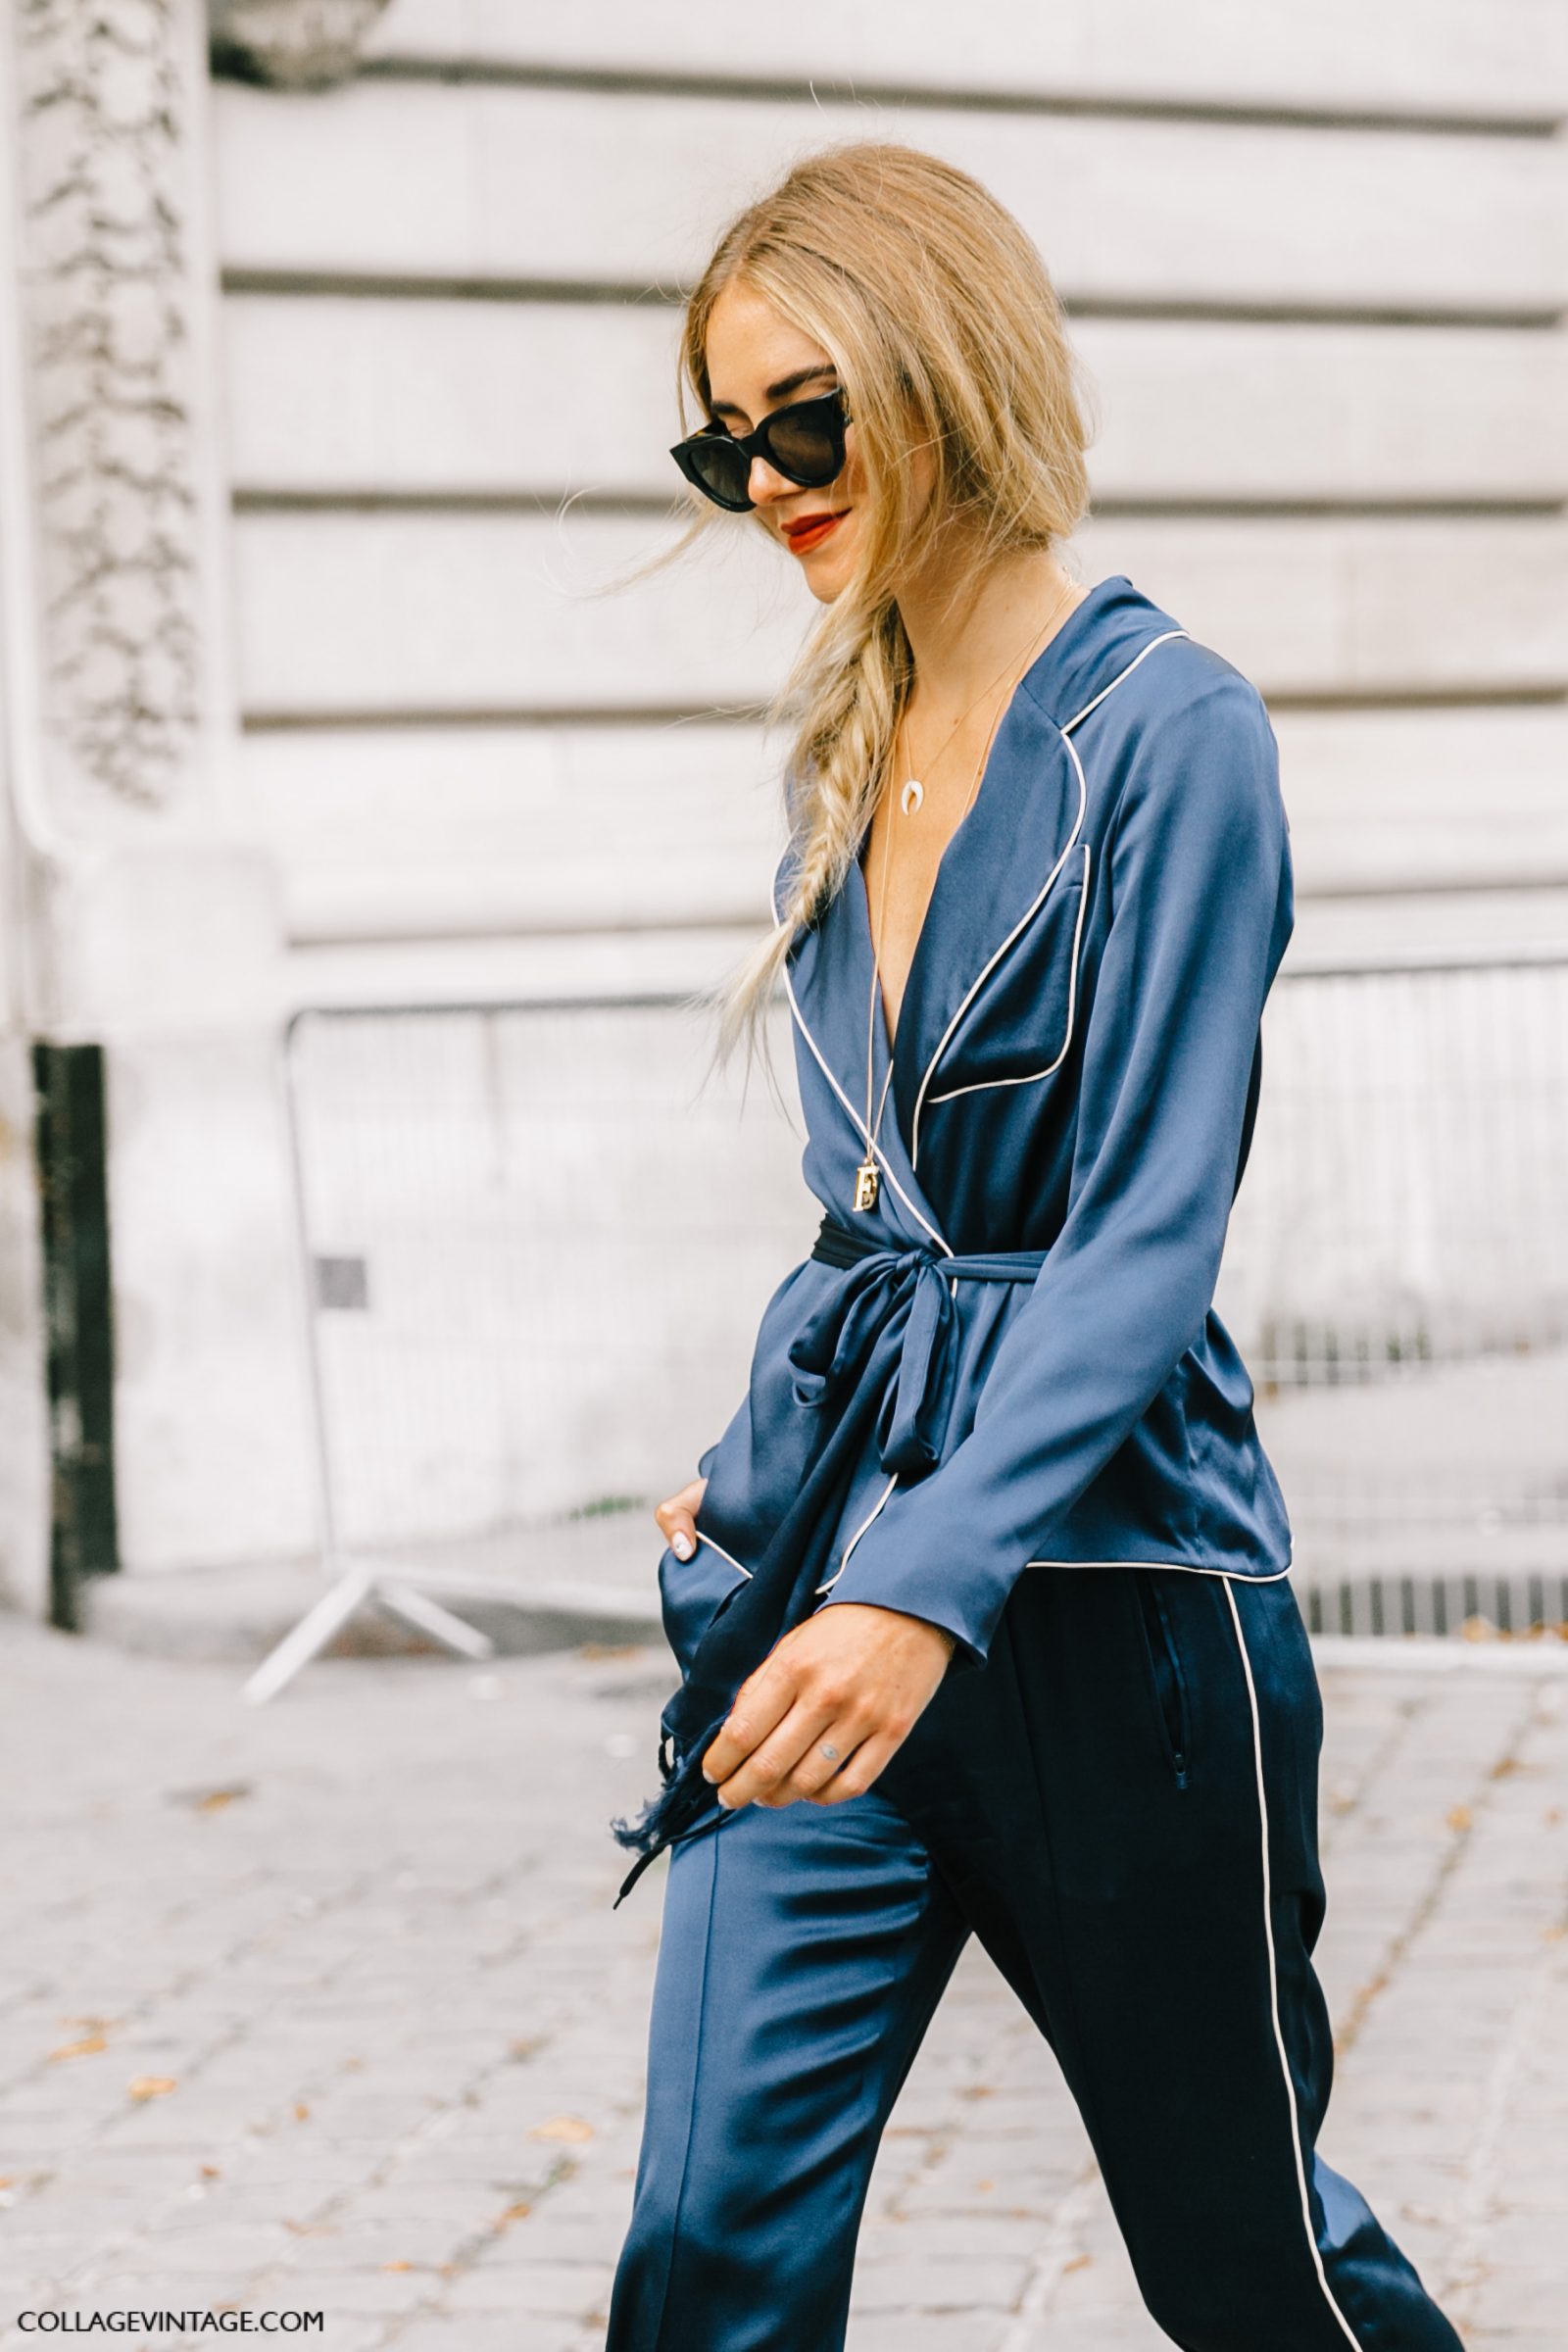 pfw-paris_fashion_week_ss17-street_style-outfits-collage_vintage-chloe ...